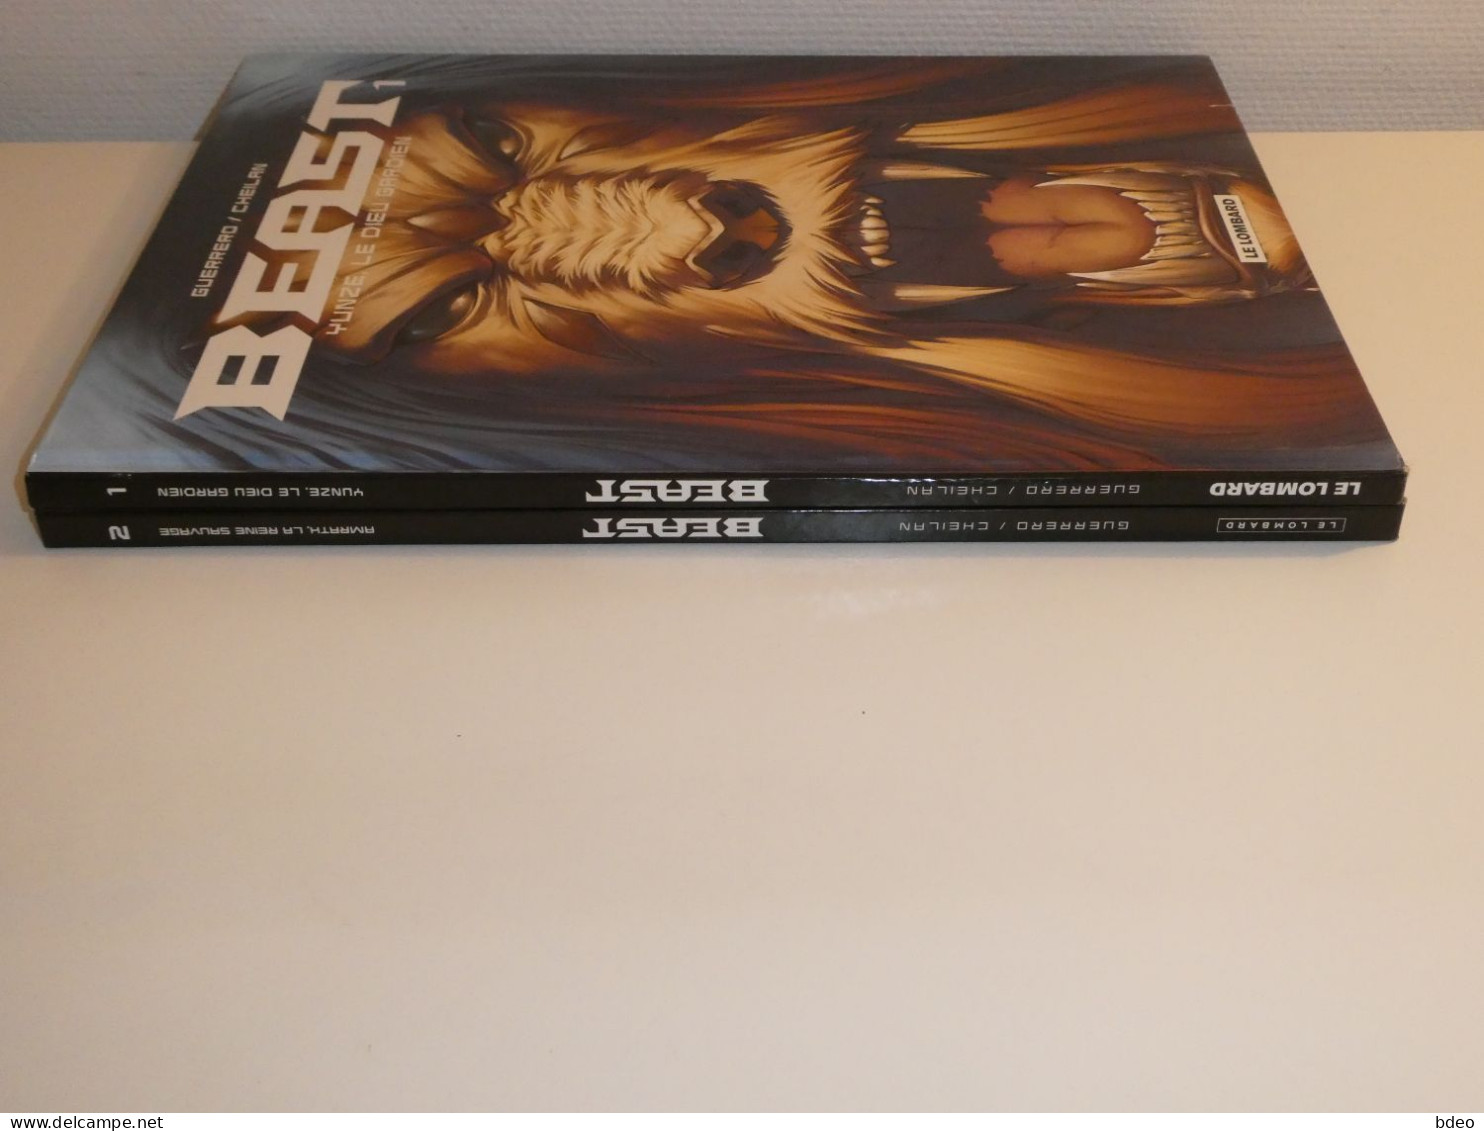 LOT EO BEAST TOMES 1/2 / BE - Paquete De Libros